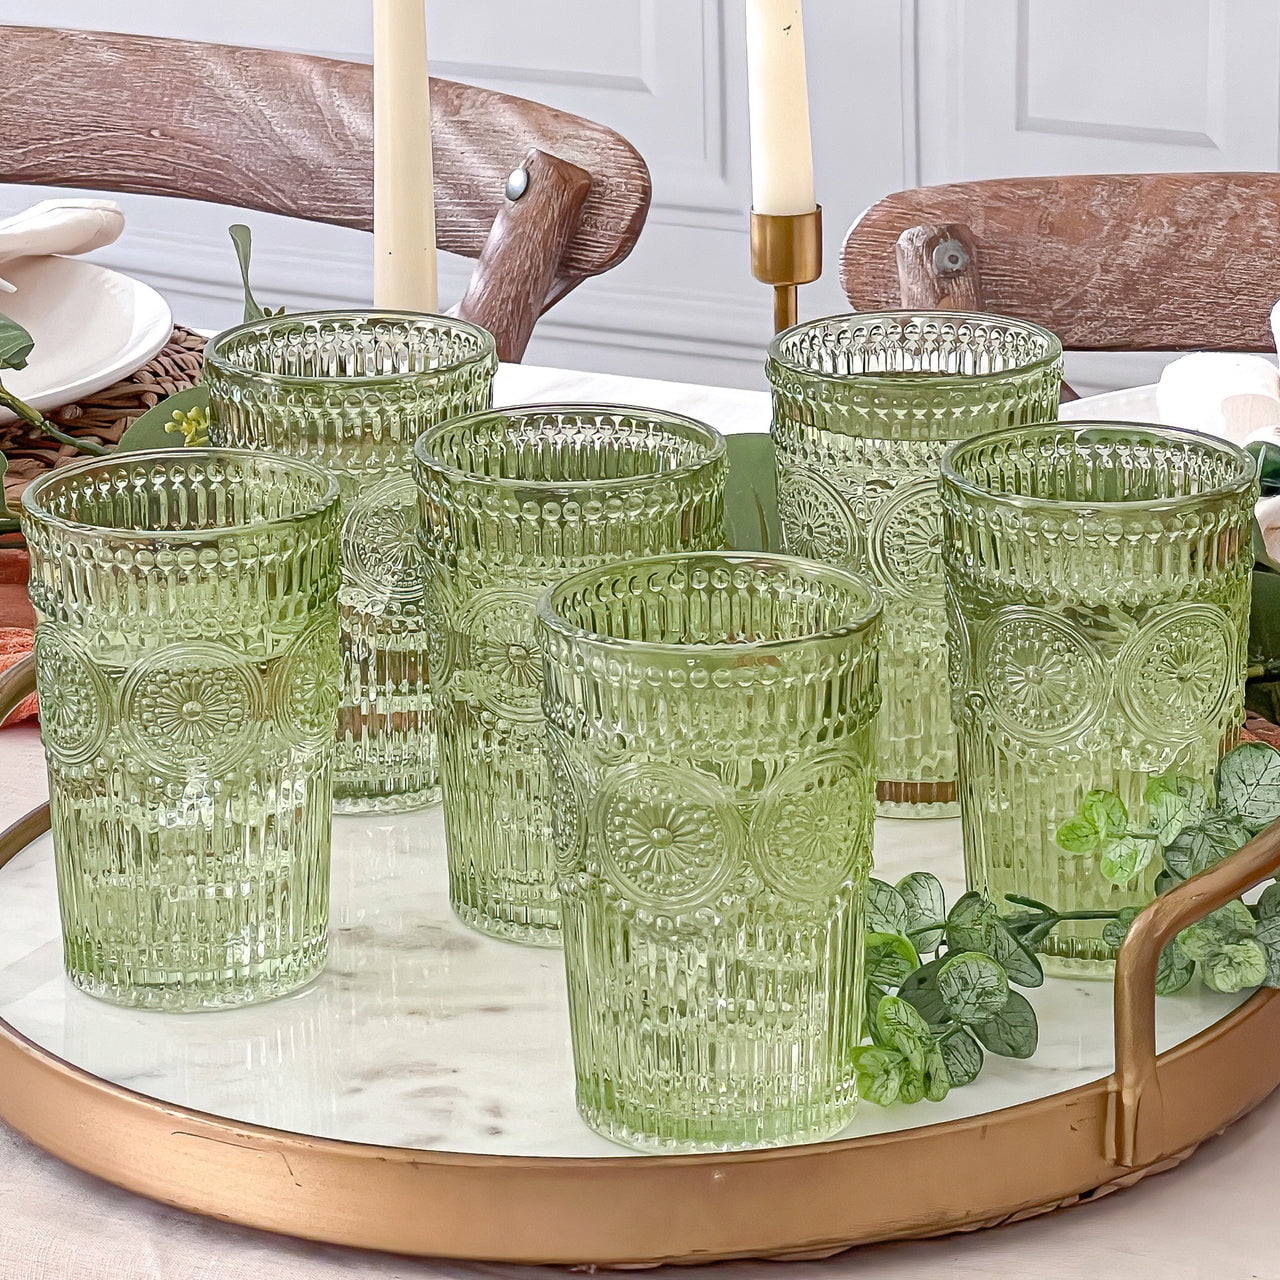 Etched Glass Tumblers. Set of Eight Water or Juice Glasses.